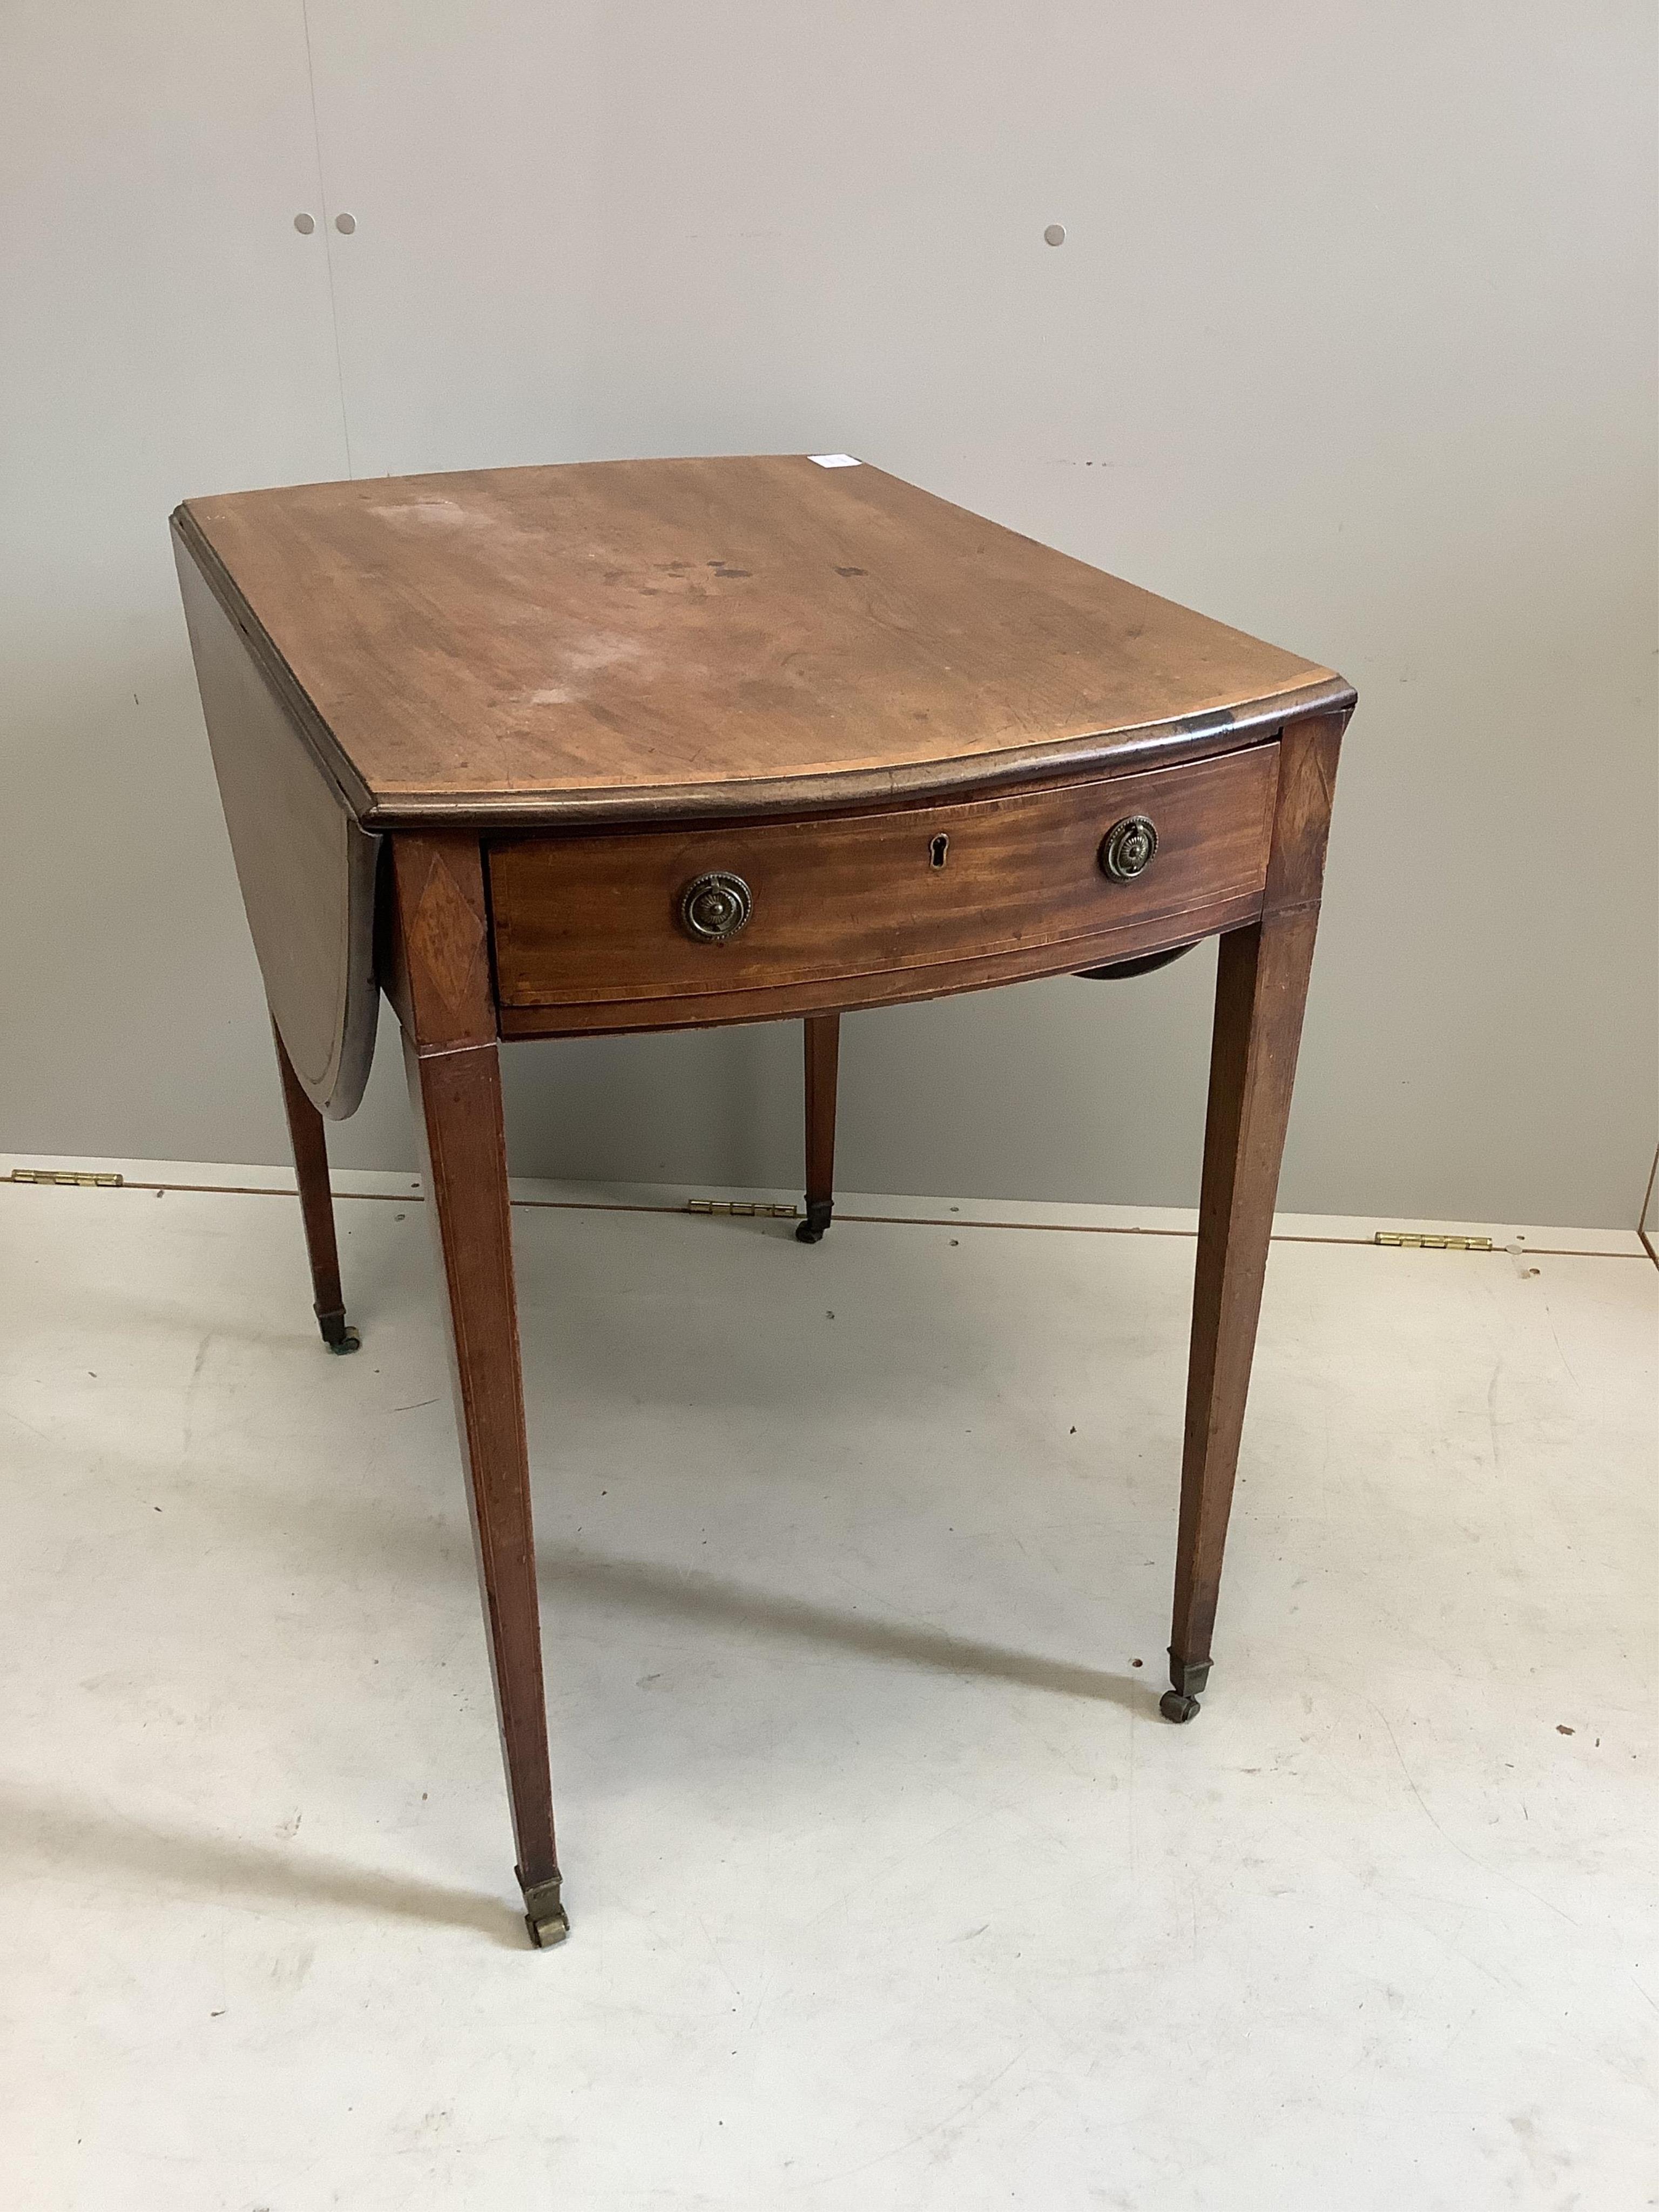 A George III mahogany and tulipwood banded oval topped Pembroke table, width 78cm, depth 53cm, height 73cm. Condition - poor